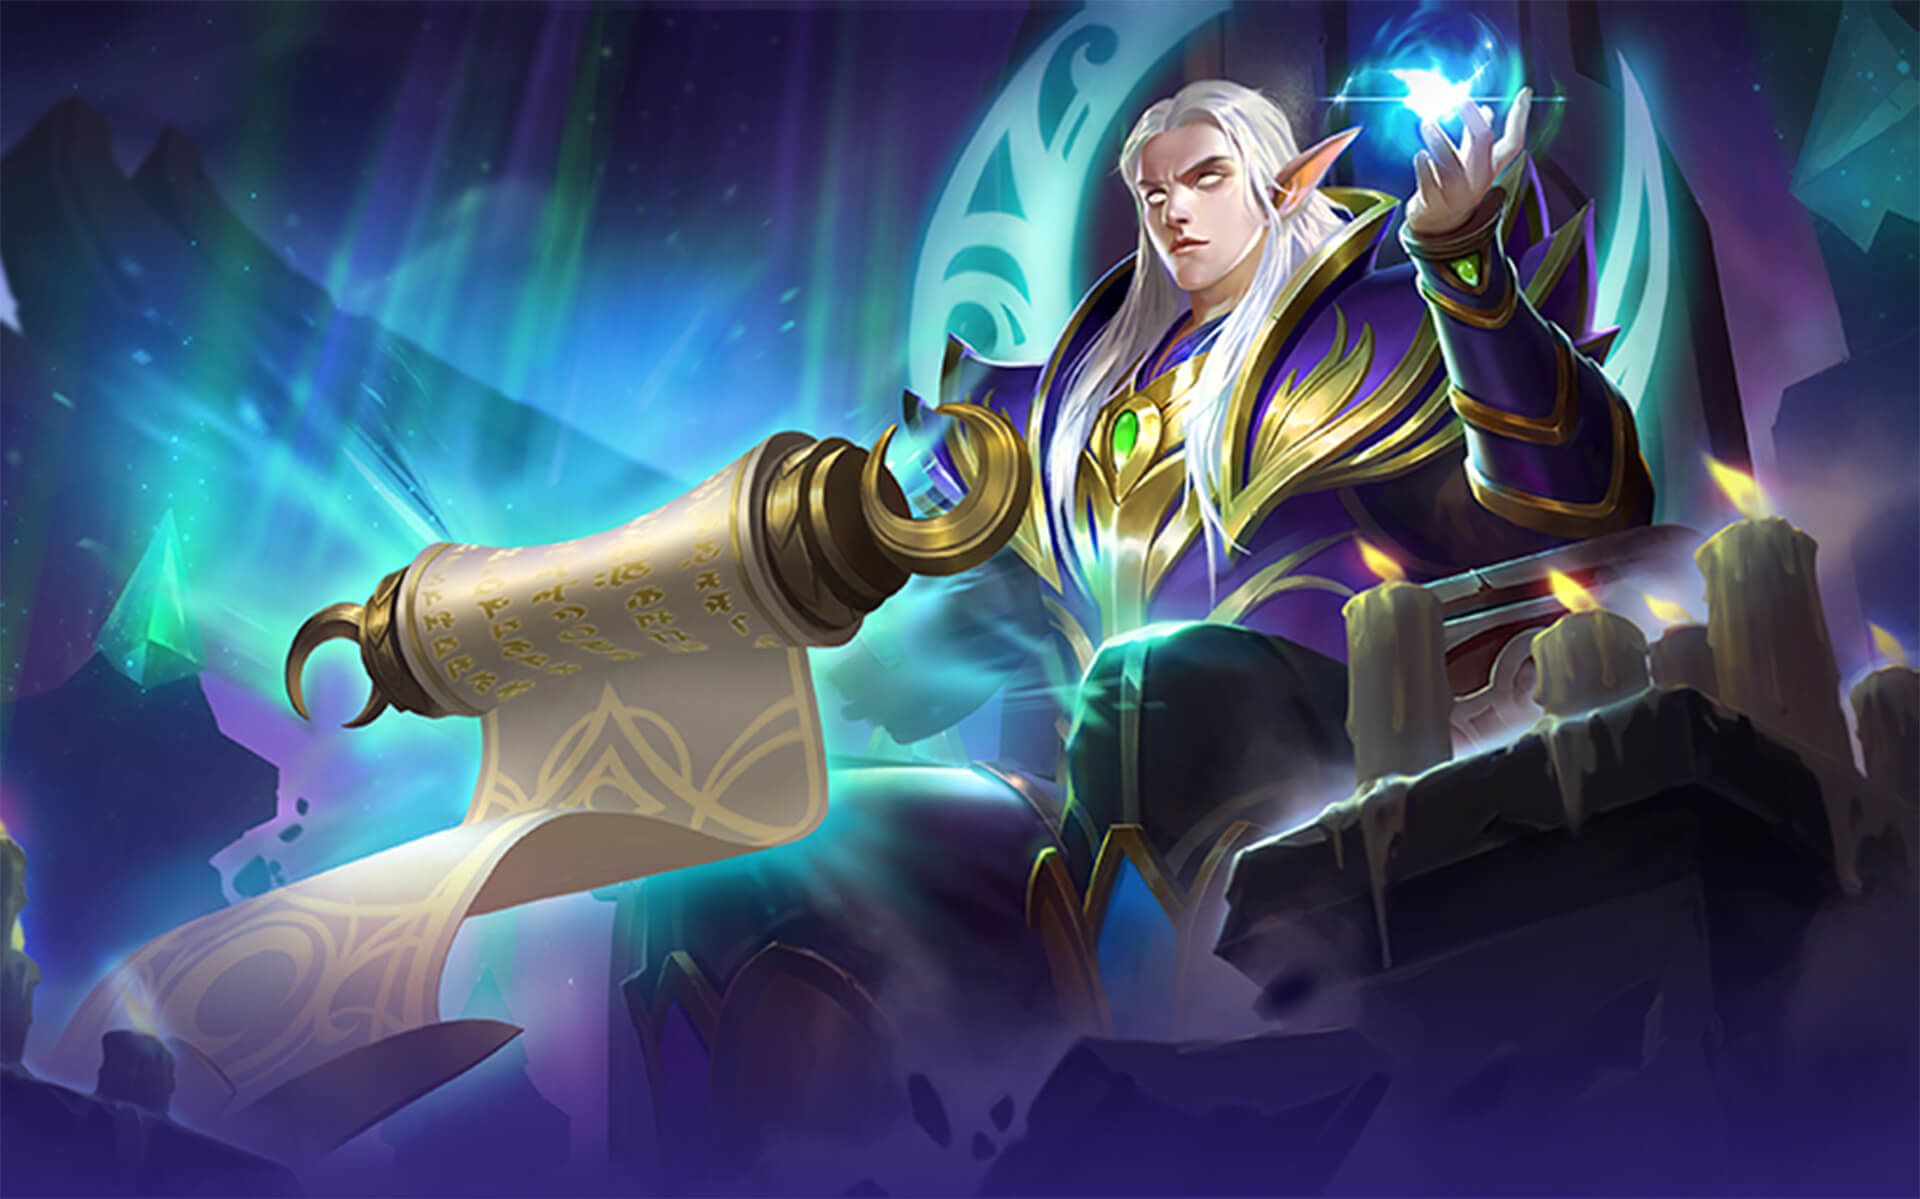 These 7 Mobile Legends Heroes are Rarely Picked, Why?